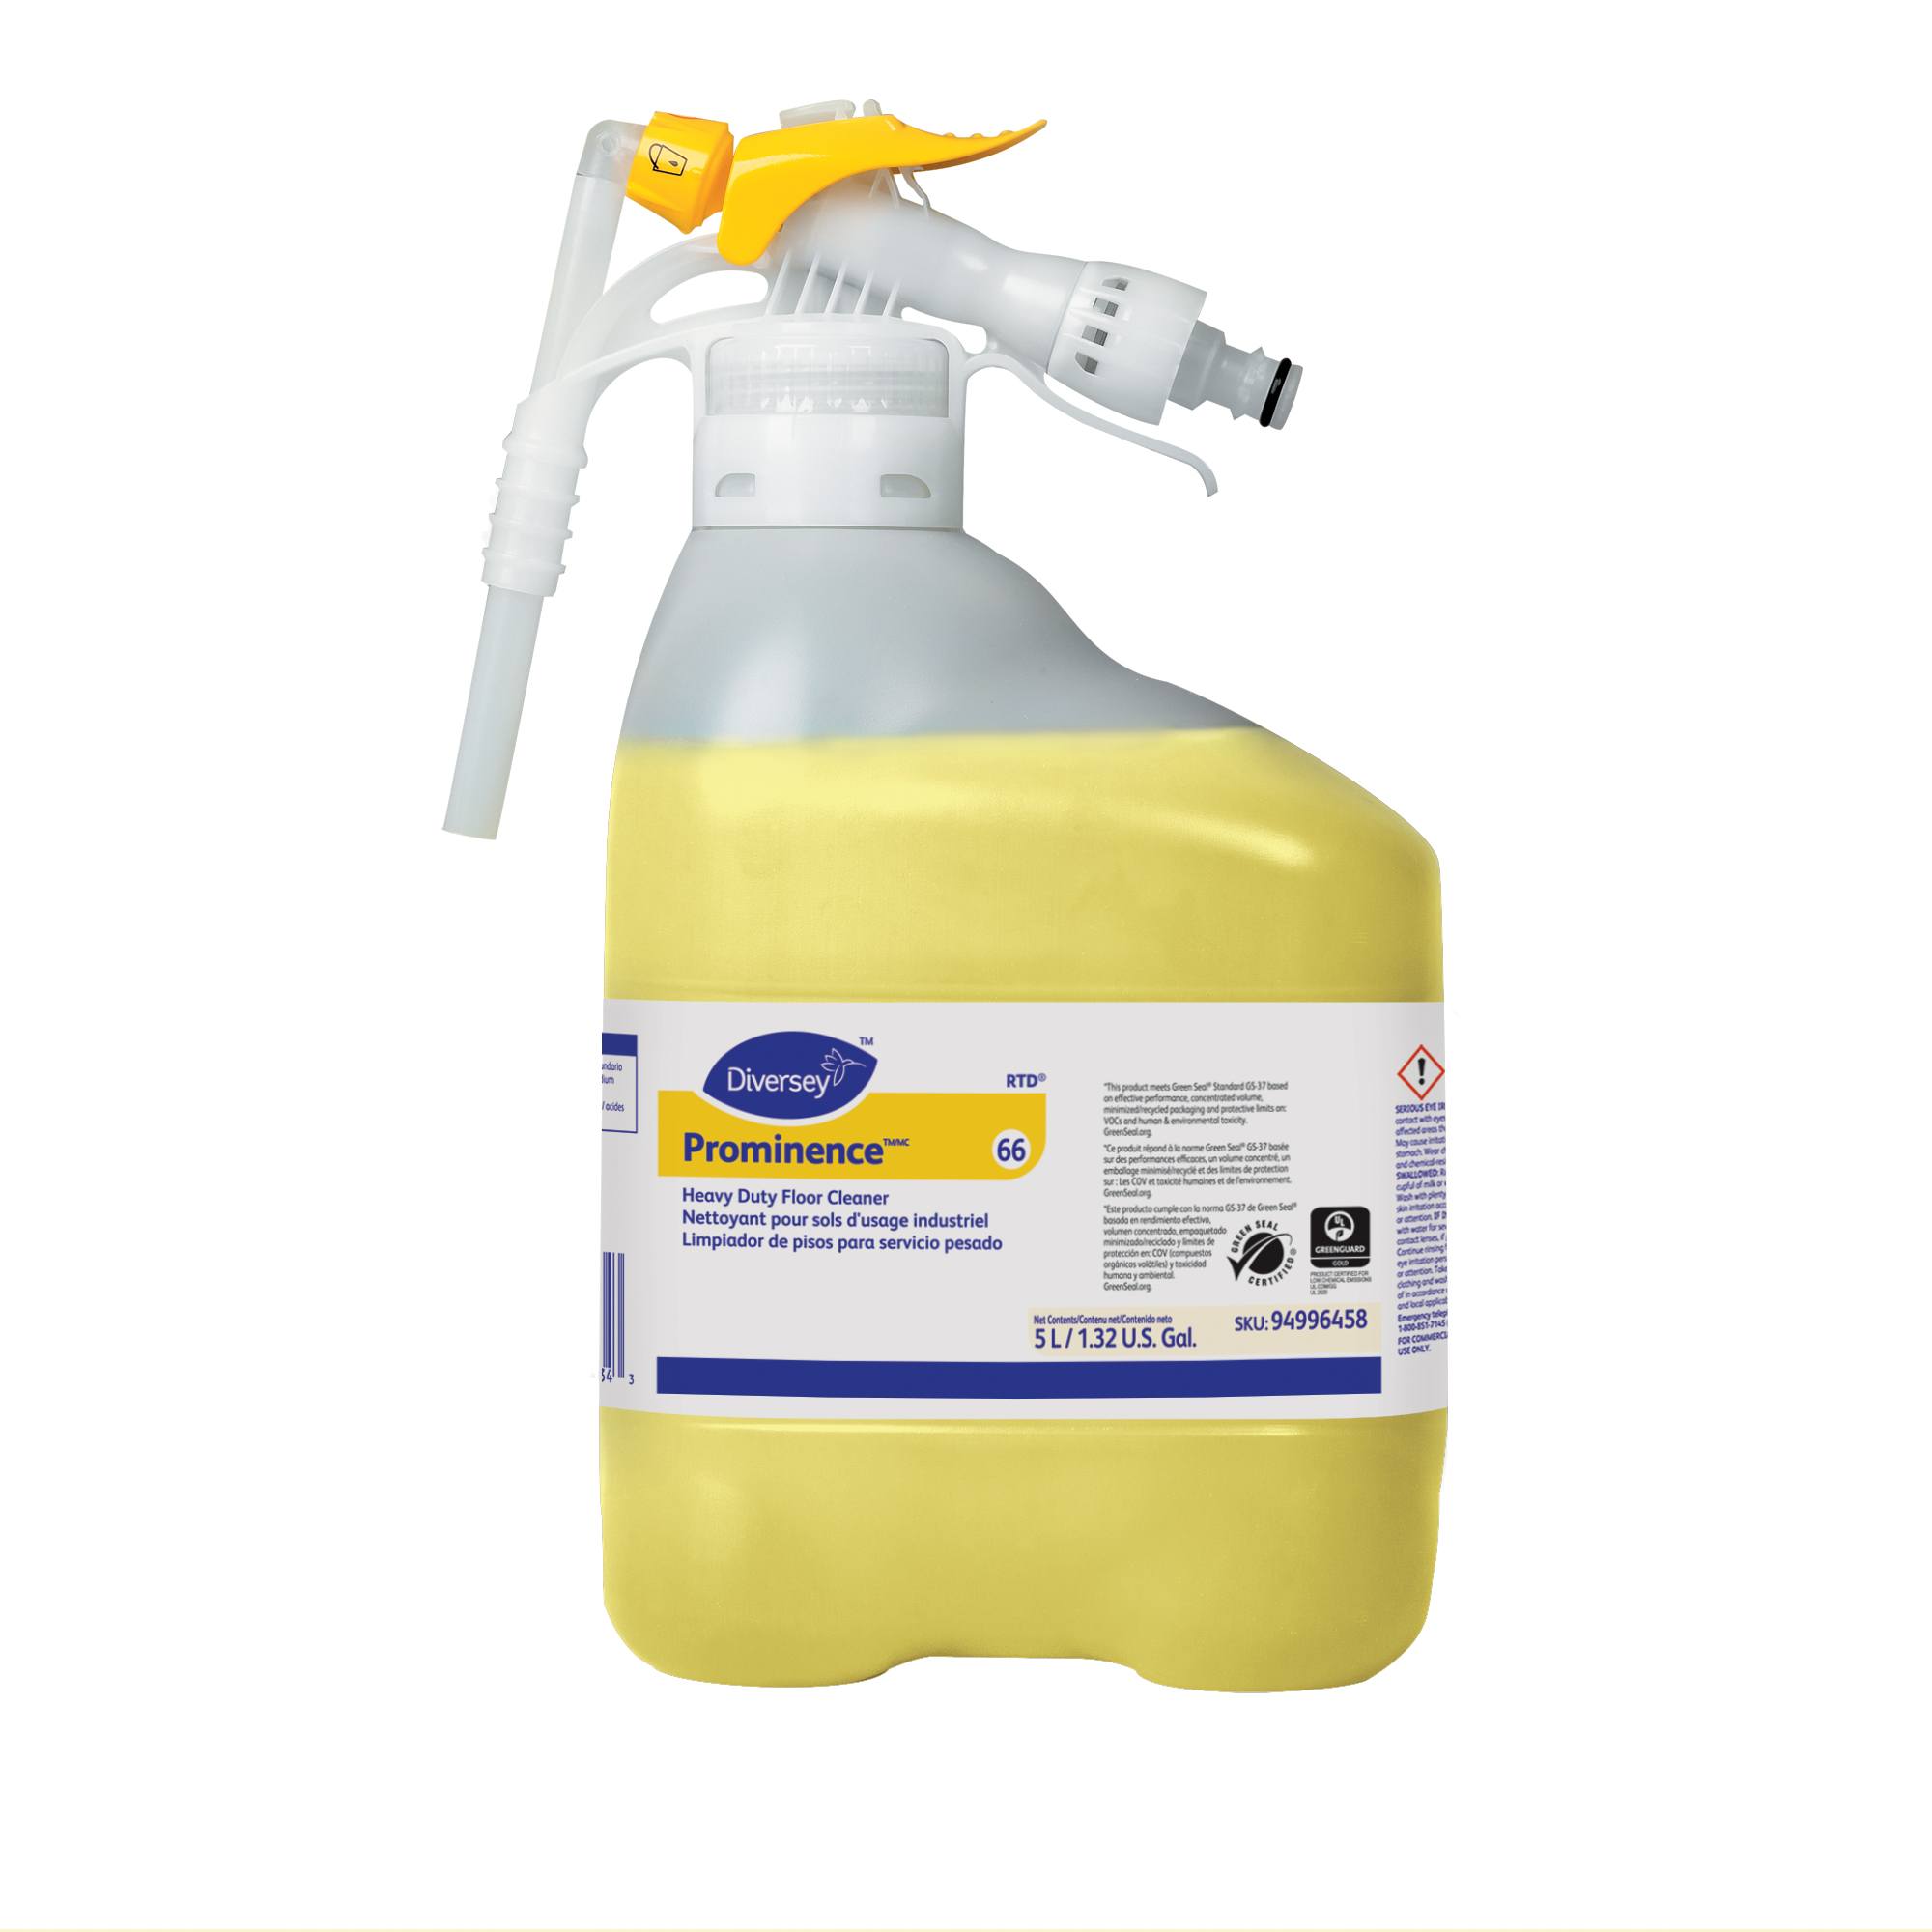 Diversey Prominence HD Floor Cleaner - 5 L RTD